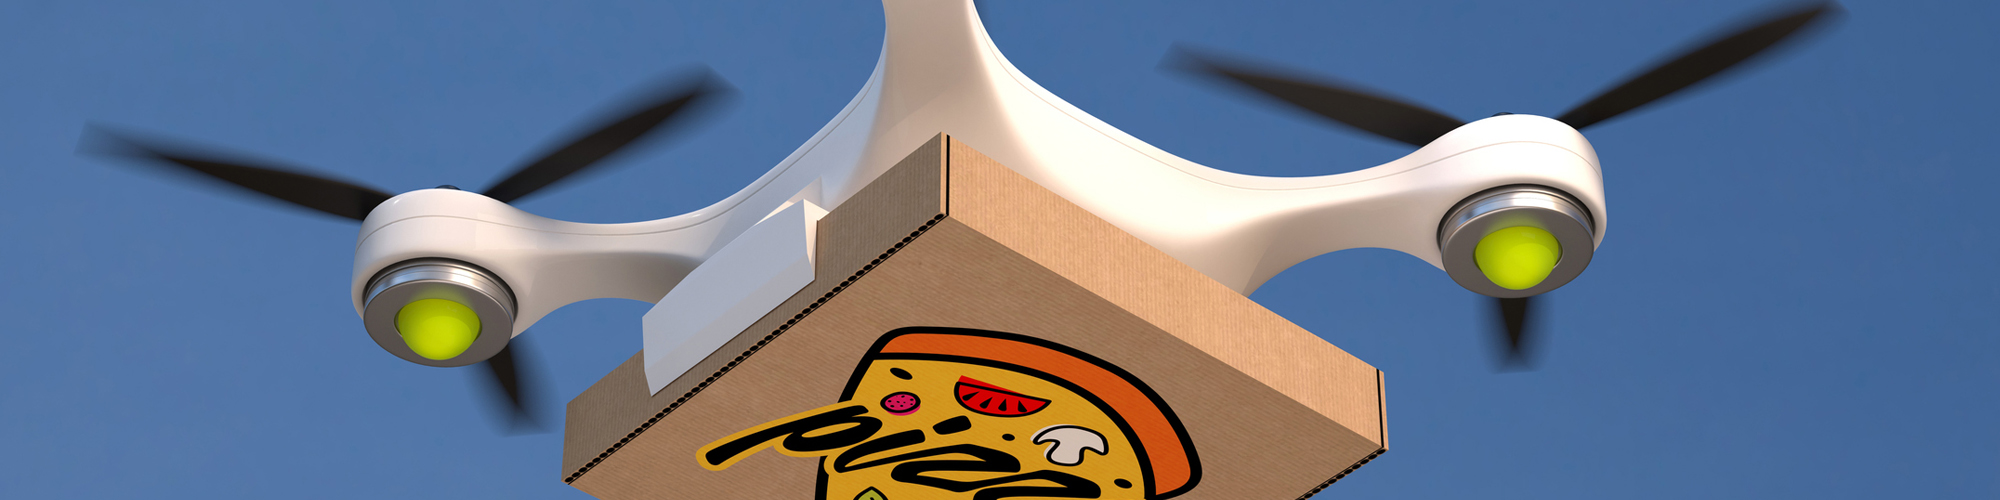 Air drone carrying a Pizza